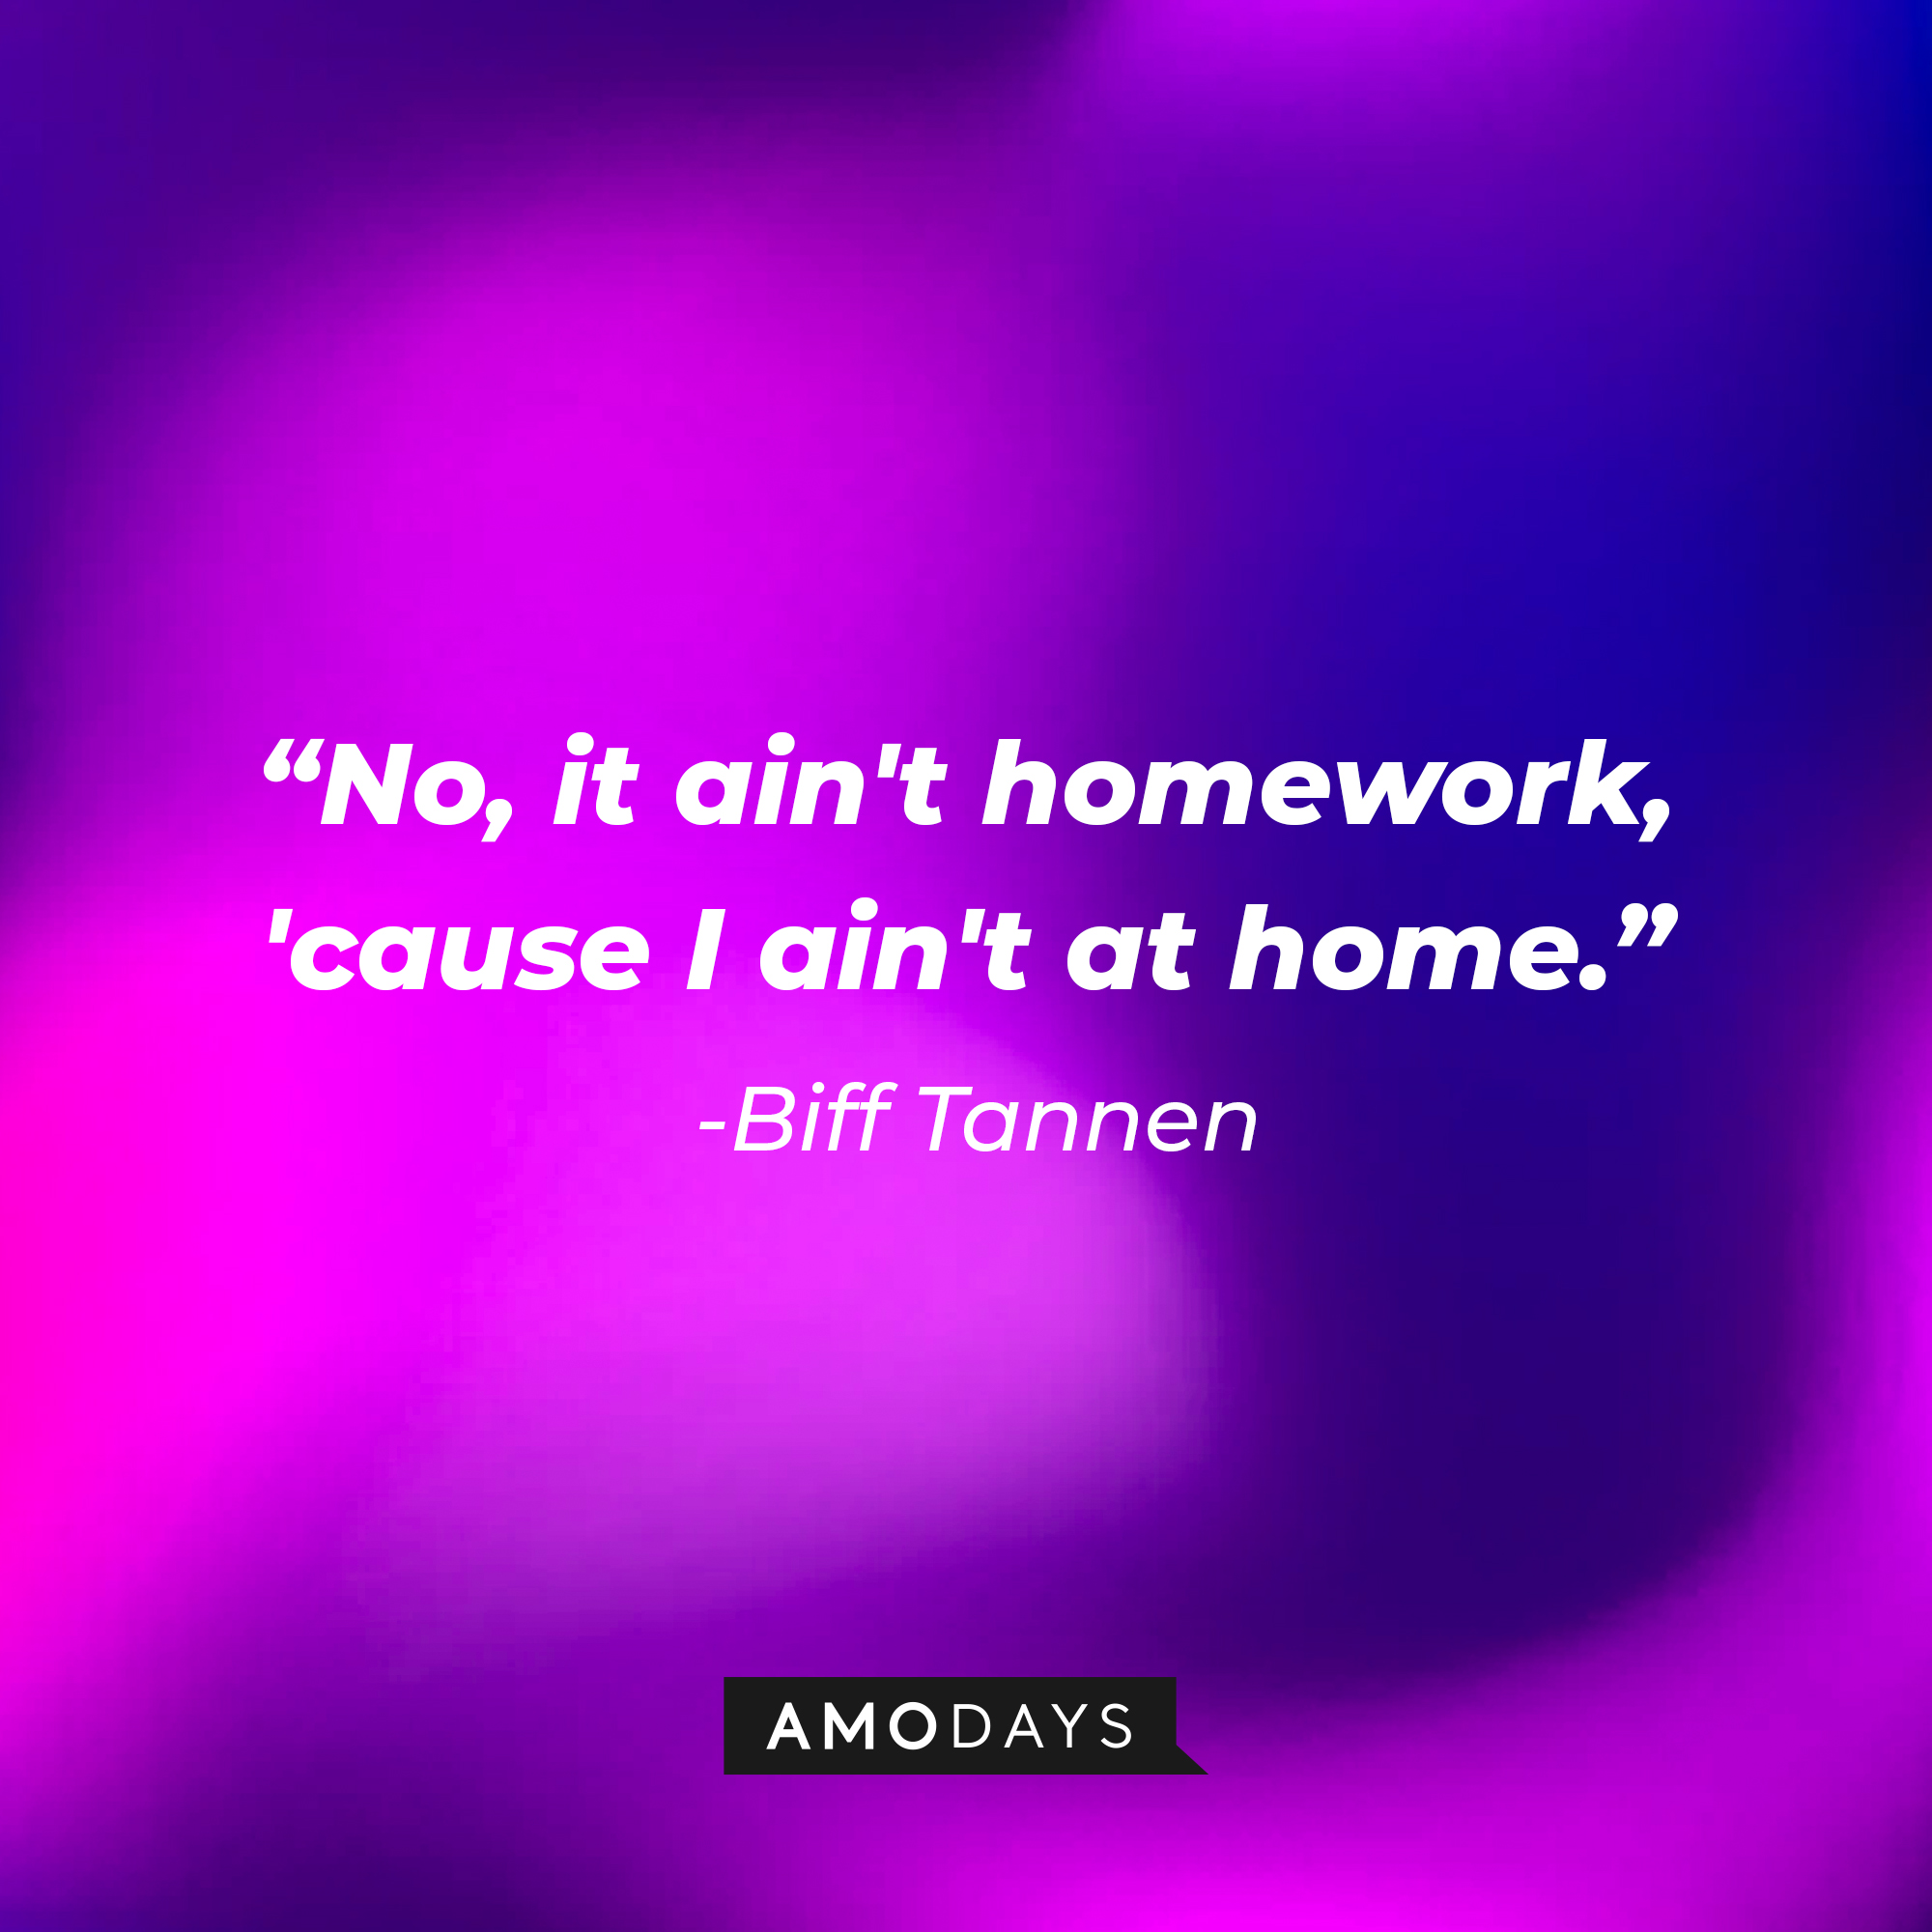 Biff Tannen’s quote: “No, it ain't homework, 'cause I ain't at home.” | Source: AmoDays